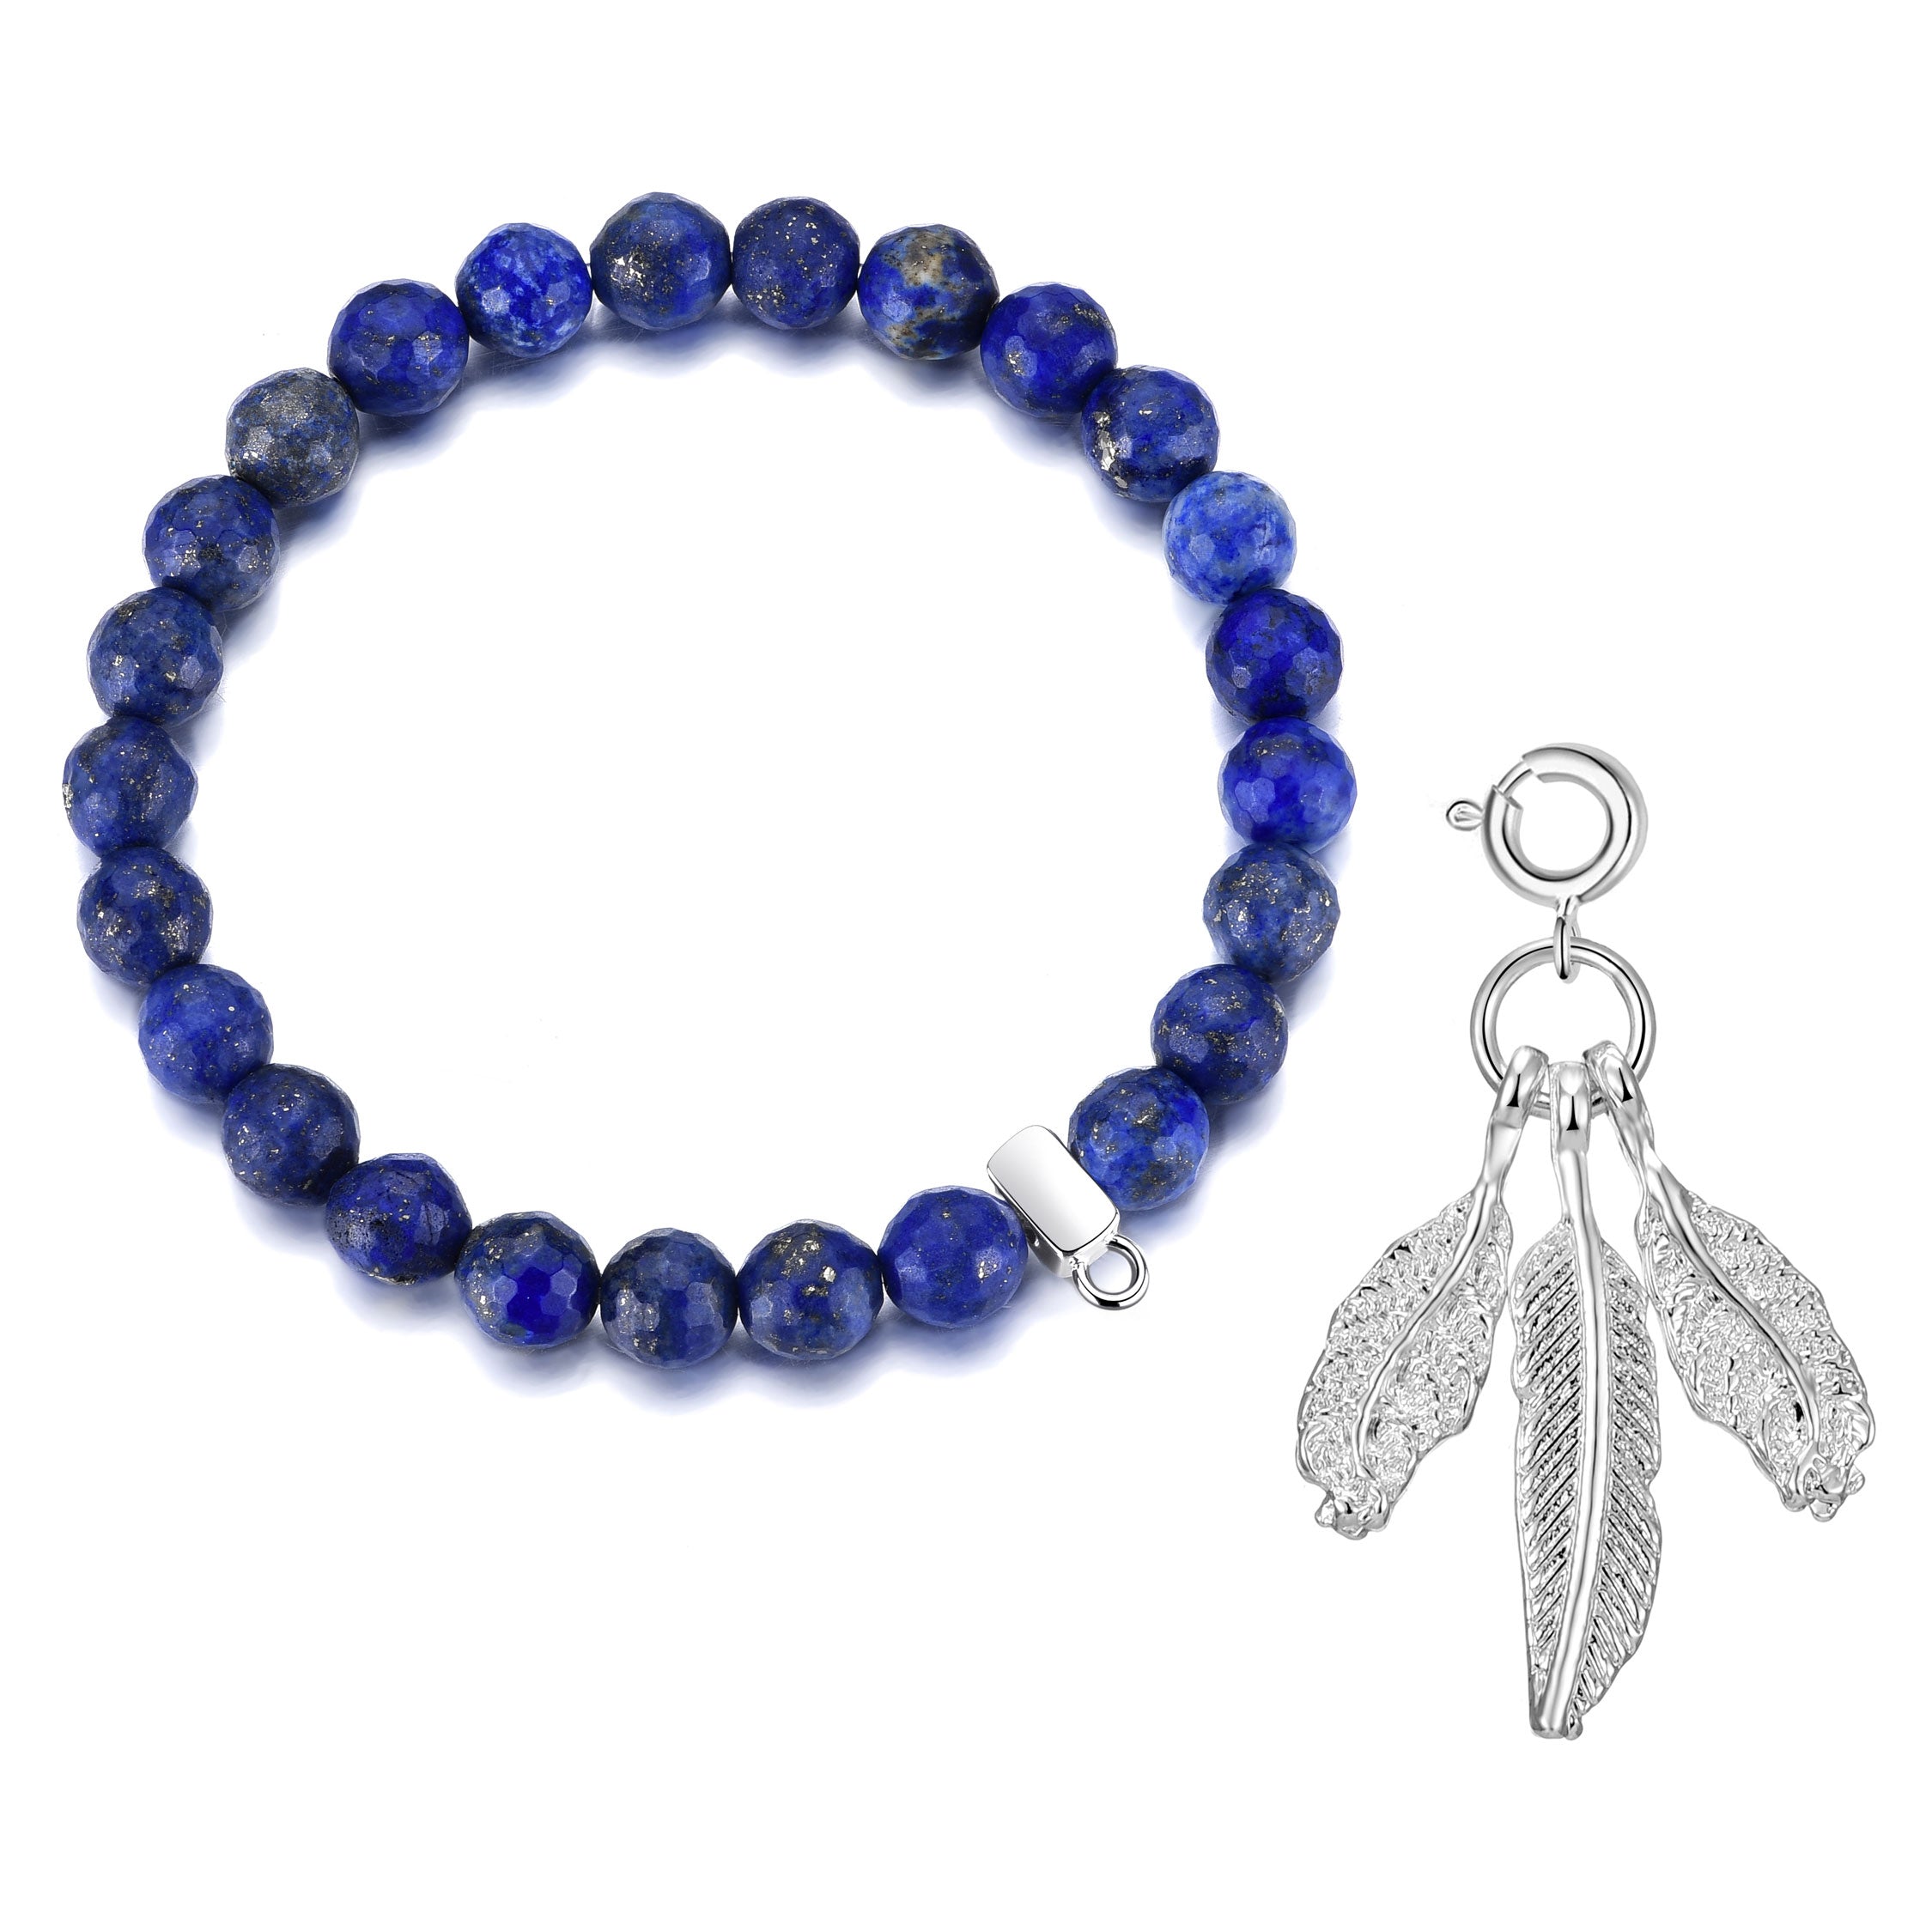 Faceted Lapis Gemstone Stretch Bracelet with Charm Created with Zircondia® Crystals